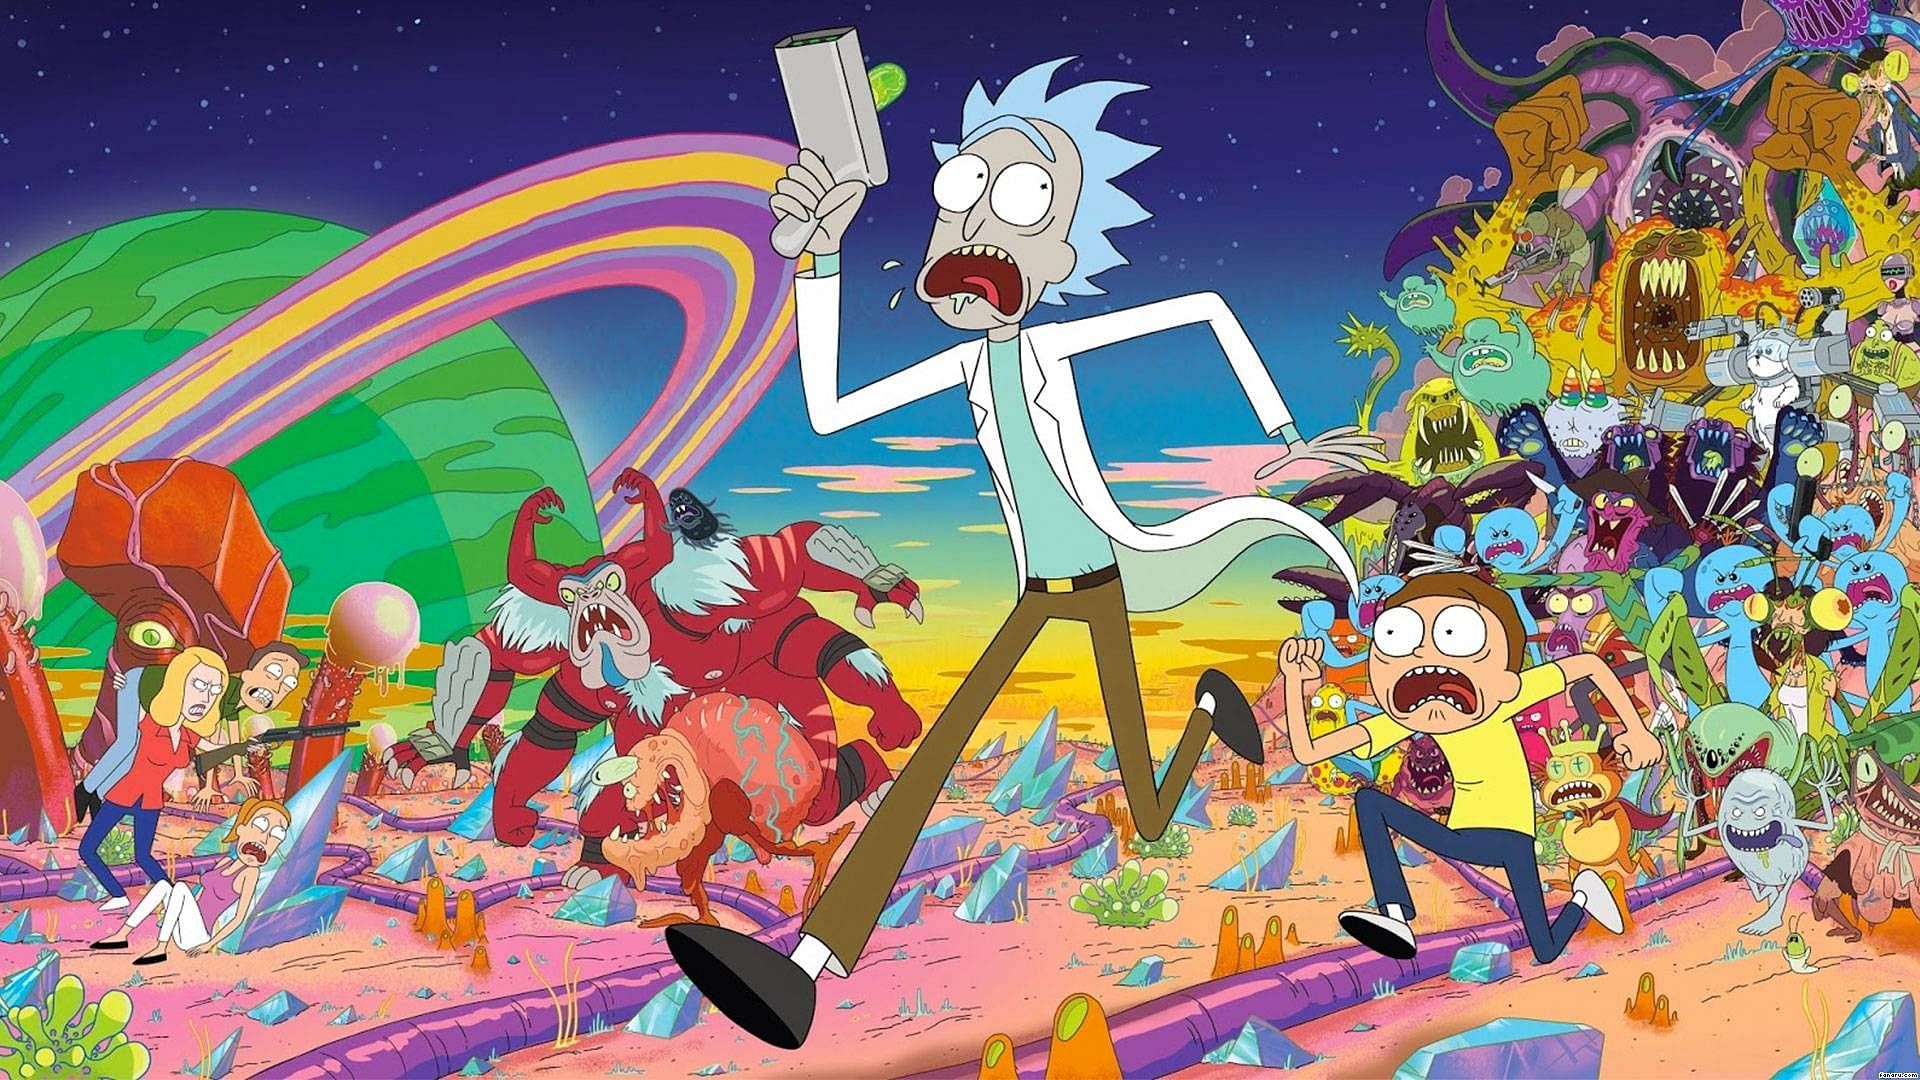 Rick and Morty is a famous American adult animated show that mixes sci-fi and comedy. (Image via Adult Swim)